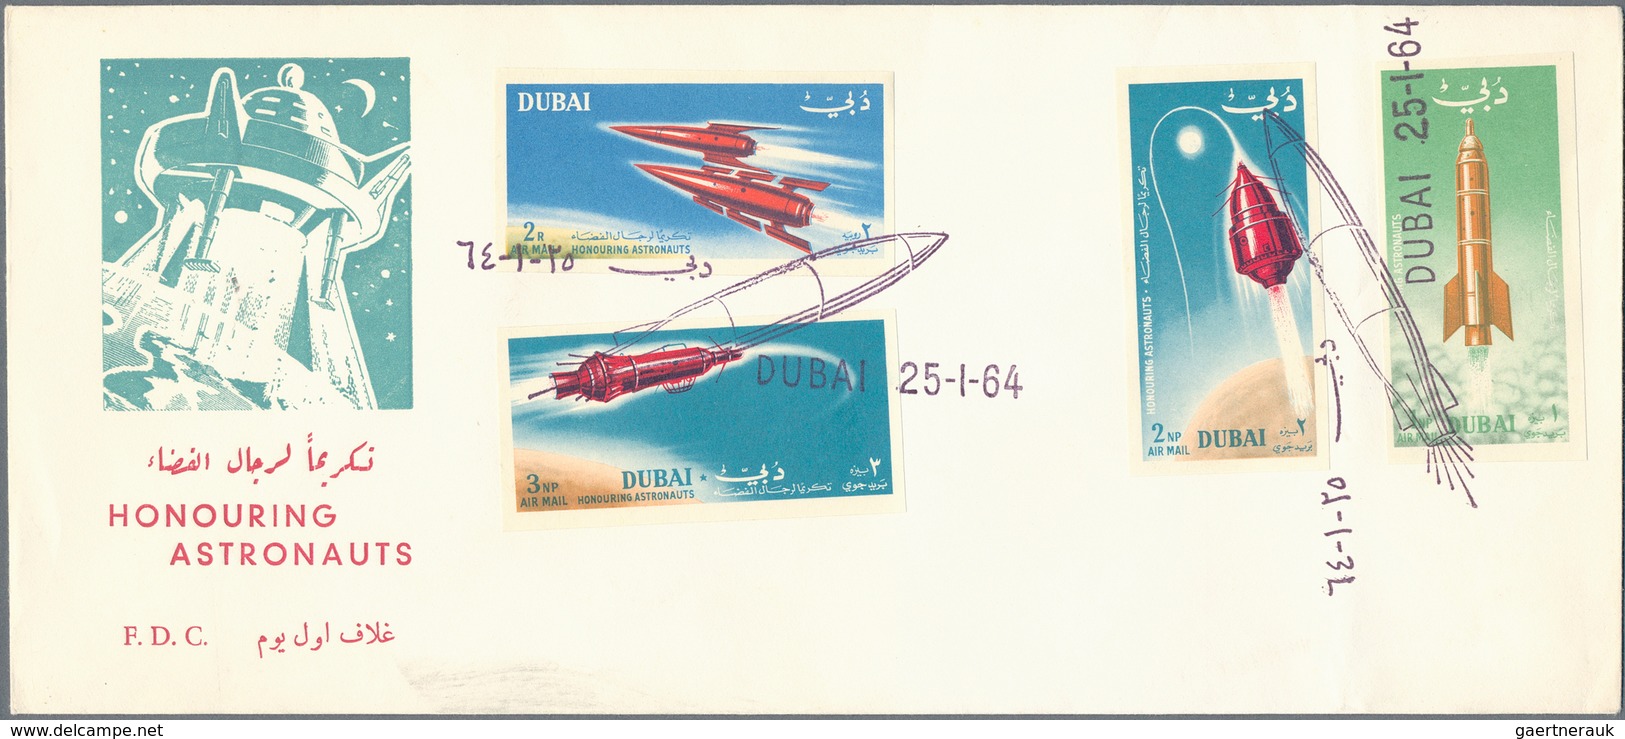 Dubai: 1954/90, covers QEII (3), independent state (8), FDC (4, 1963/64 inc. space and Kennedy), sta